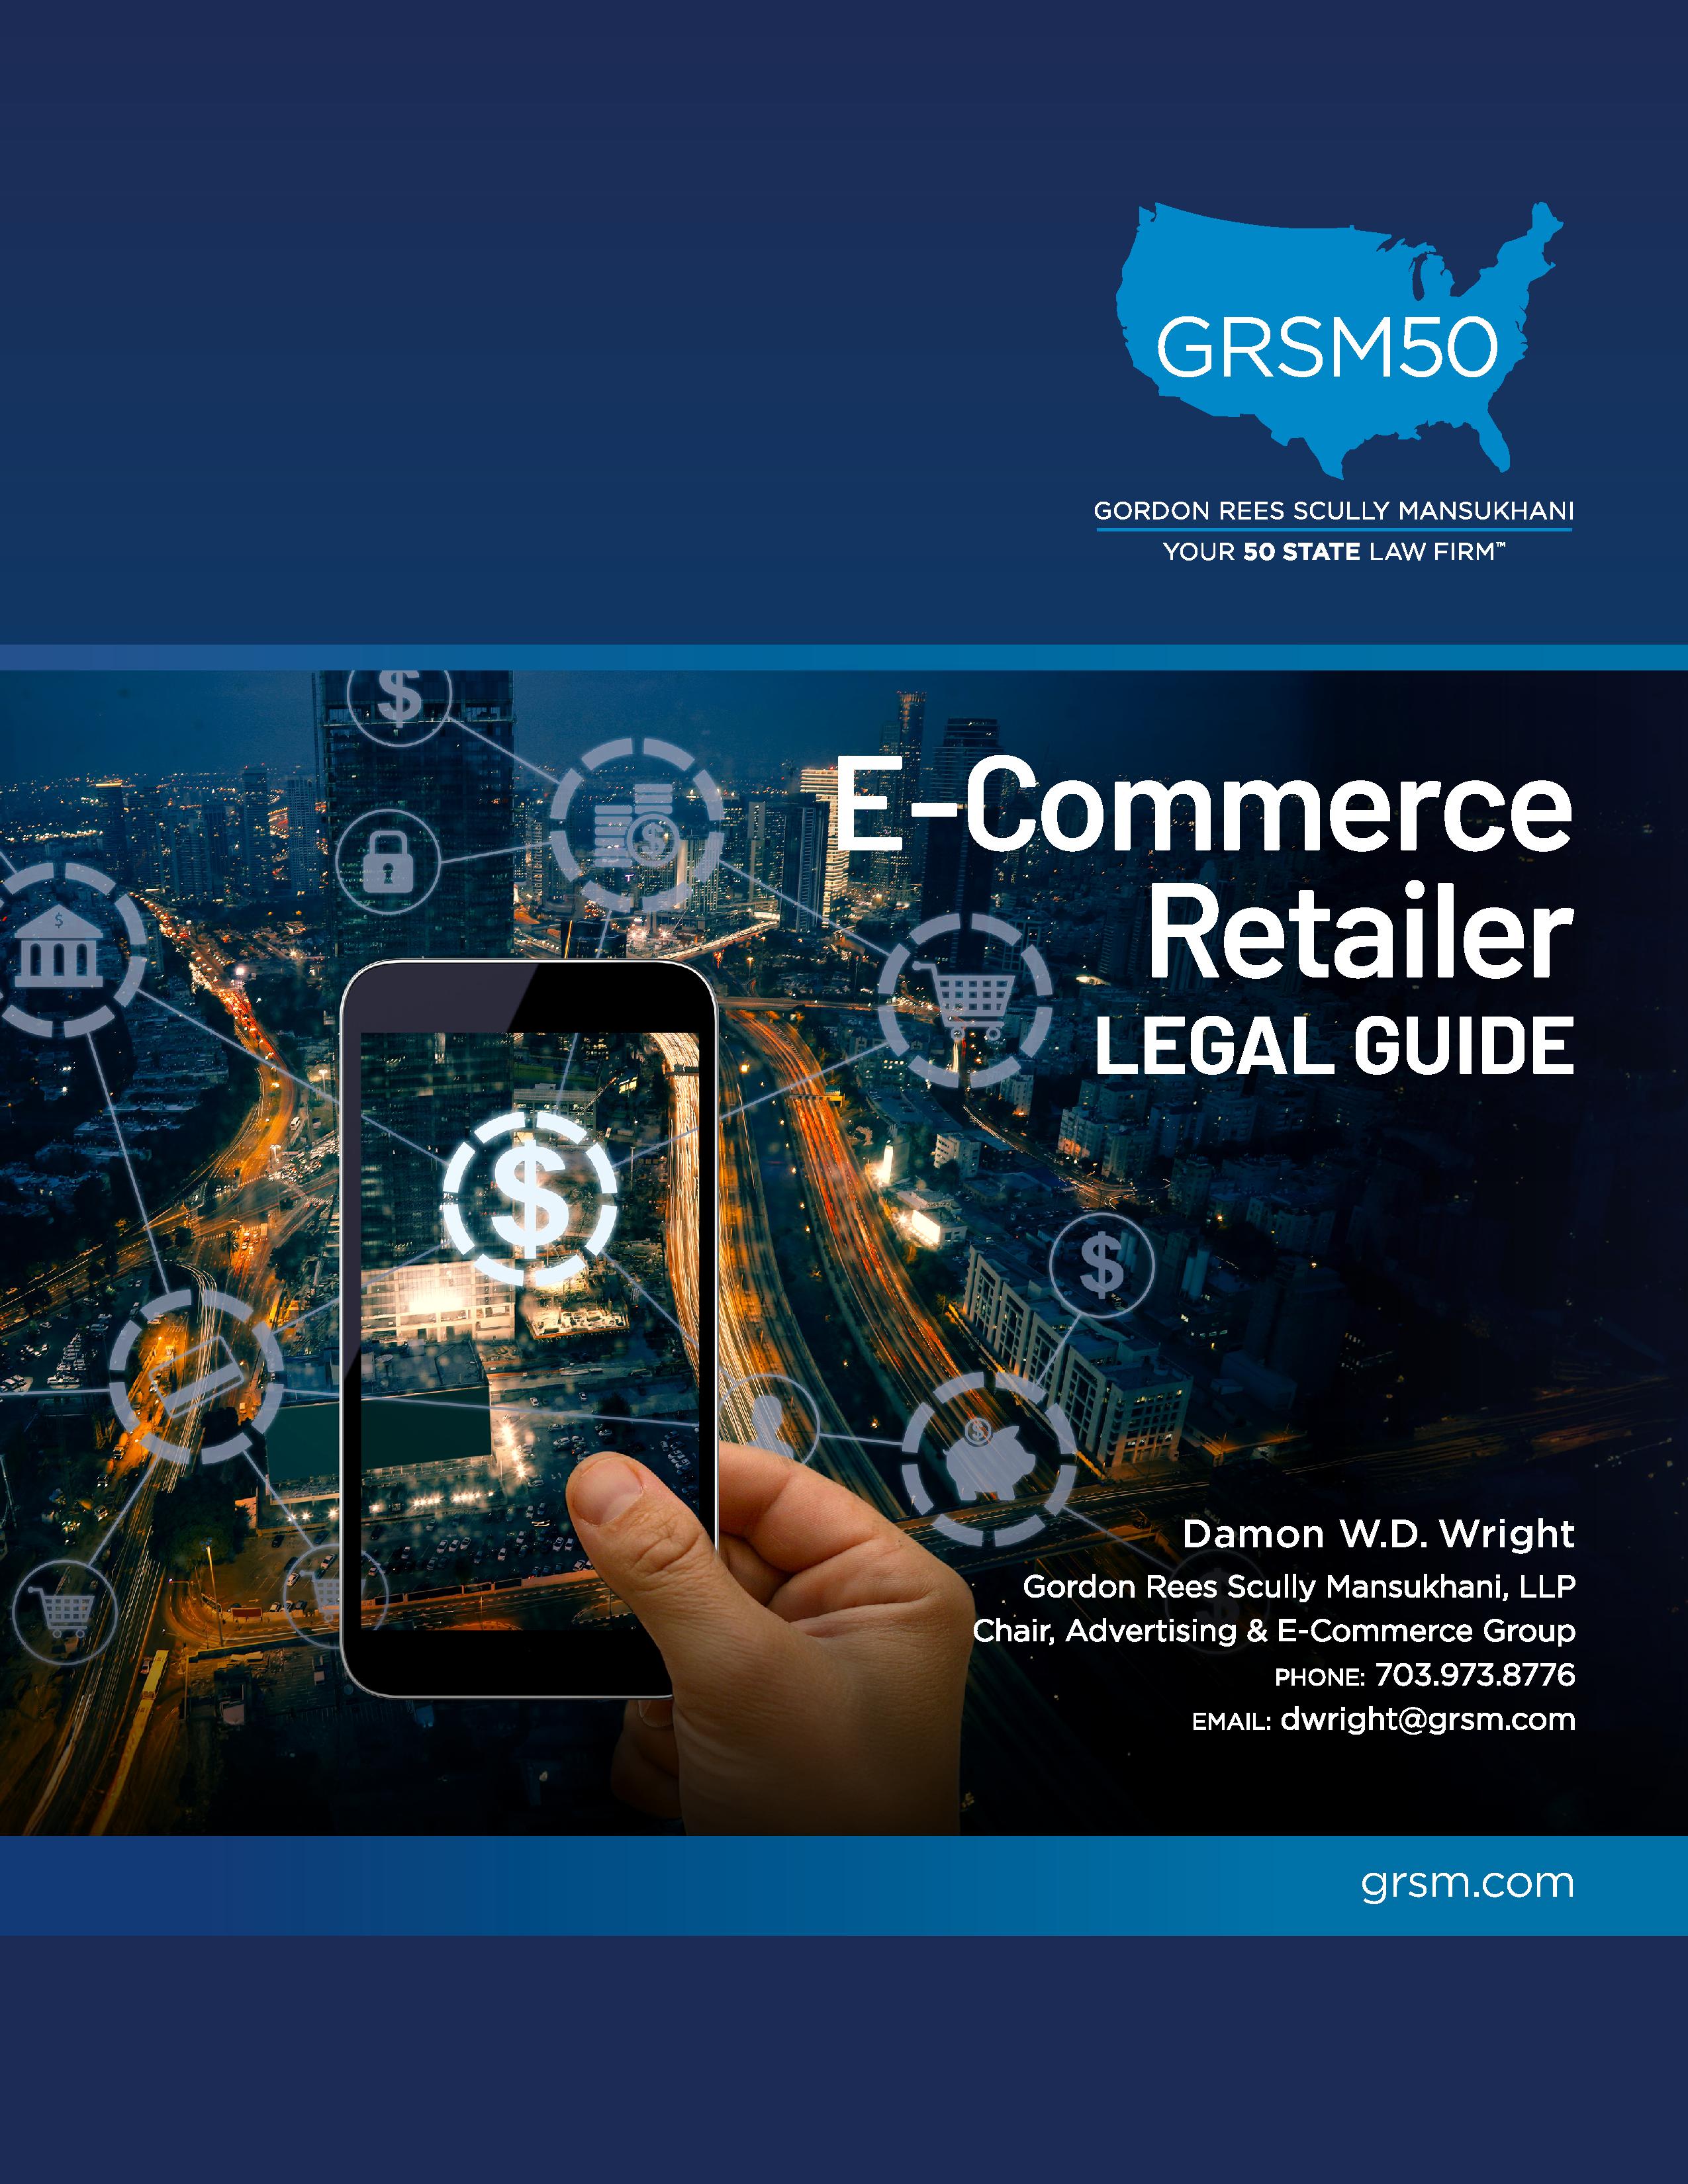 Download the E-Commerce Retailer Legal Guide here